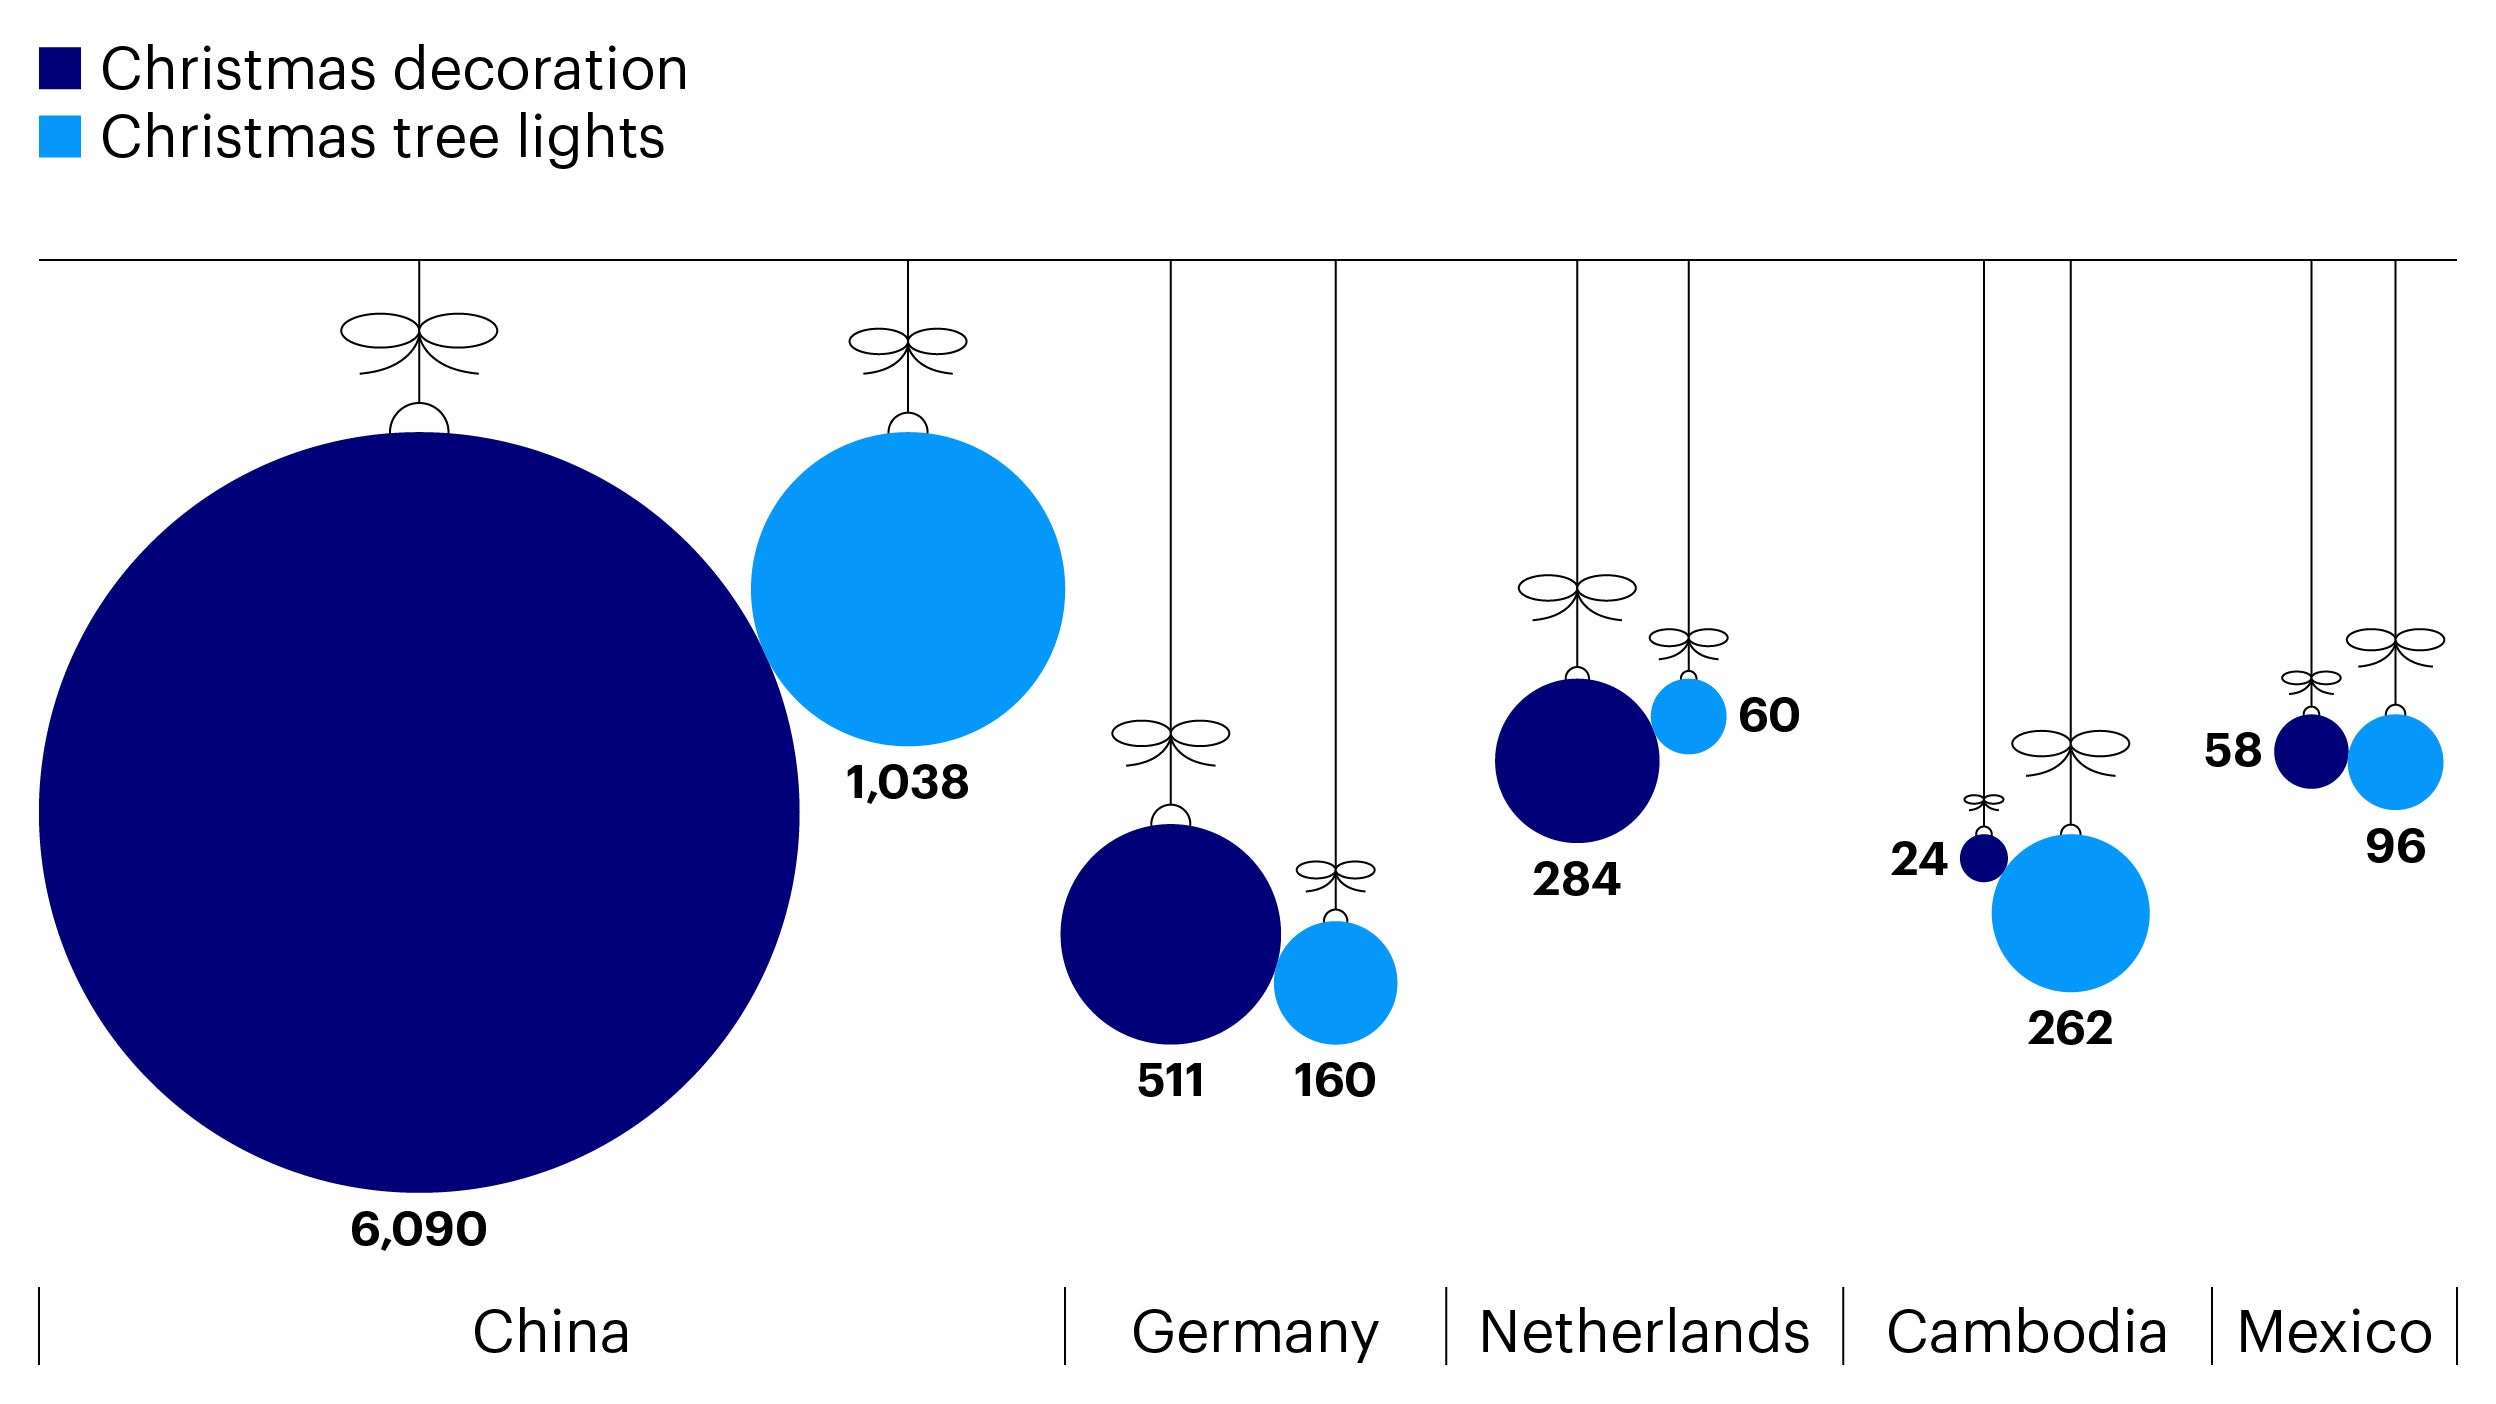 Figure 1. Top exporters of Christmas decorations and Christmas tree lights in 2020 (USD, millions)